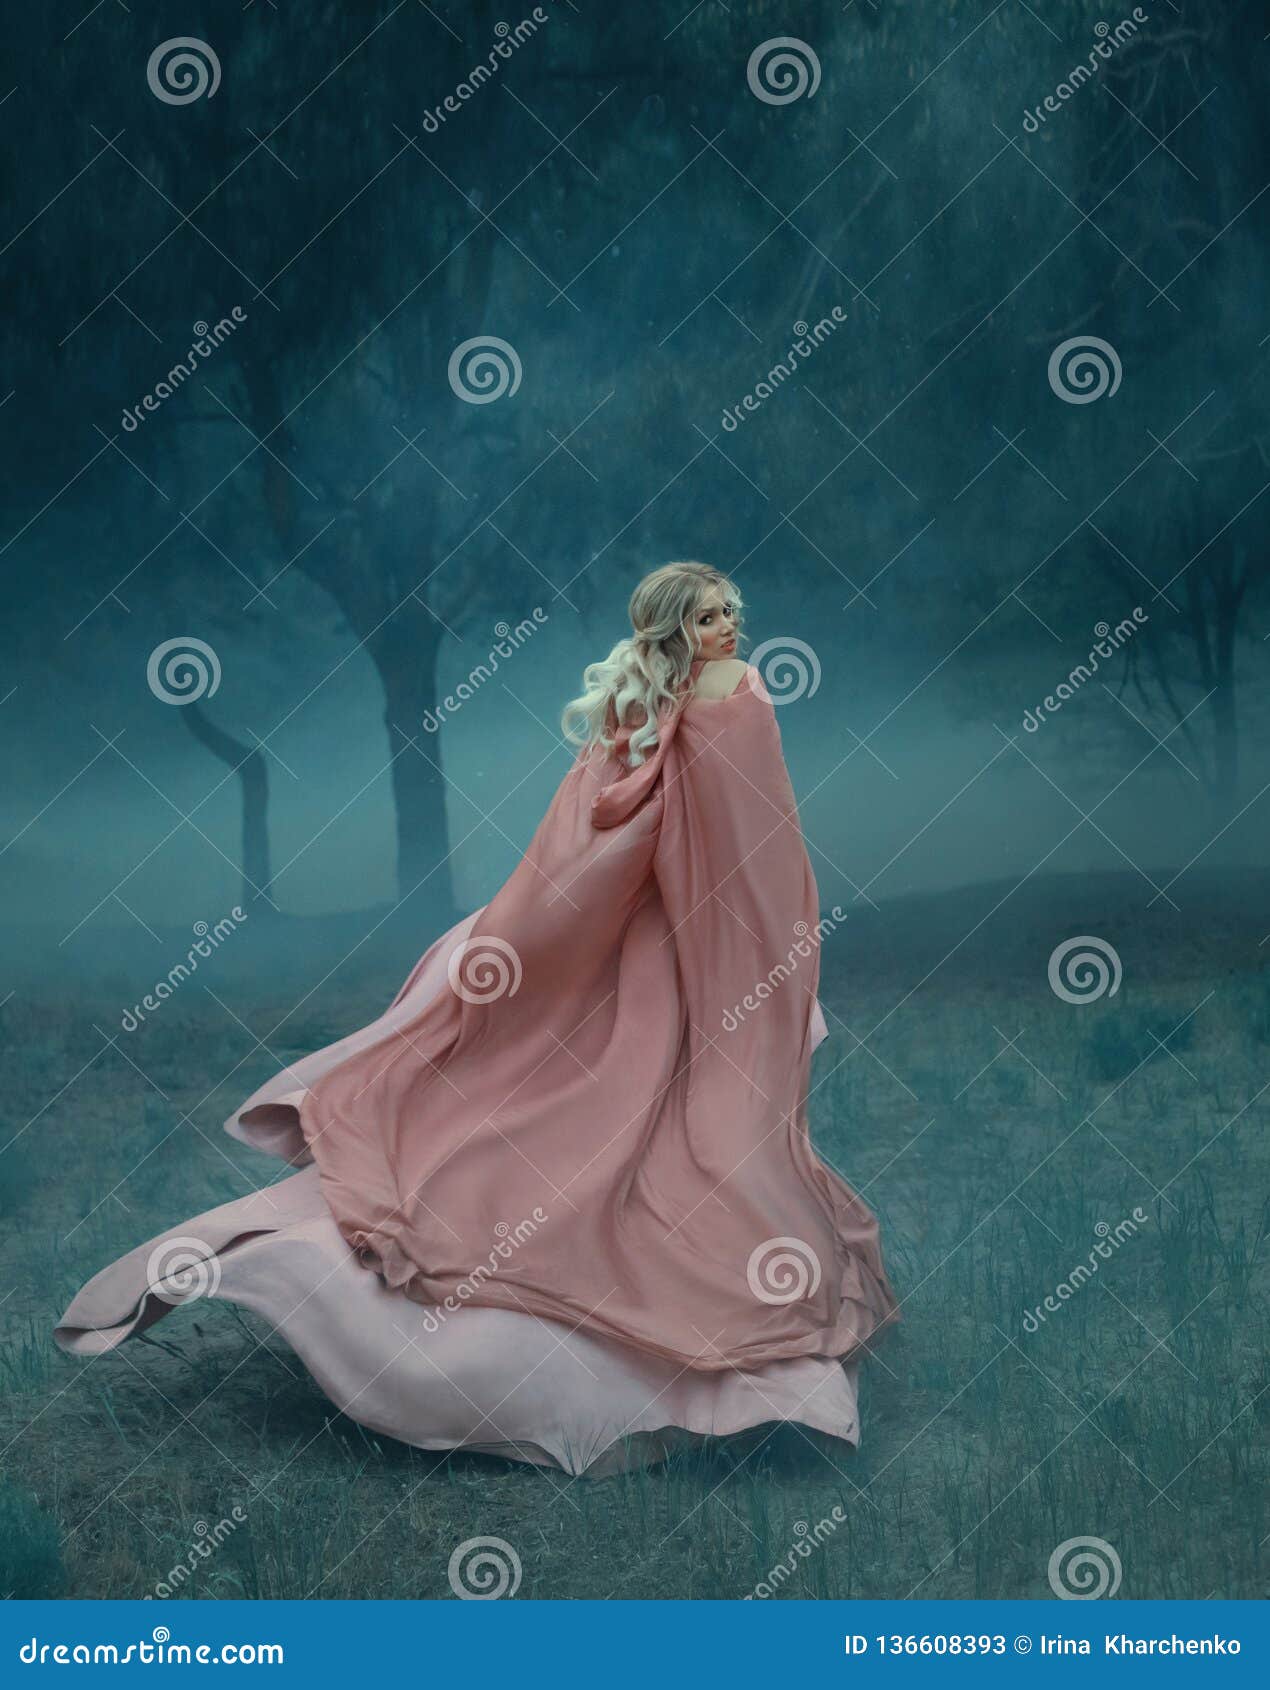 fairy-tale witch with blond hair who runs in a dark and dense mysterious forest full of white mist, dressed in a long